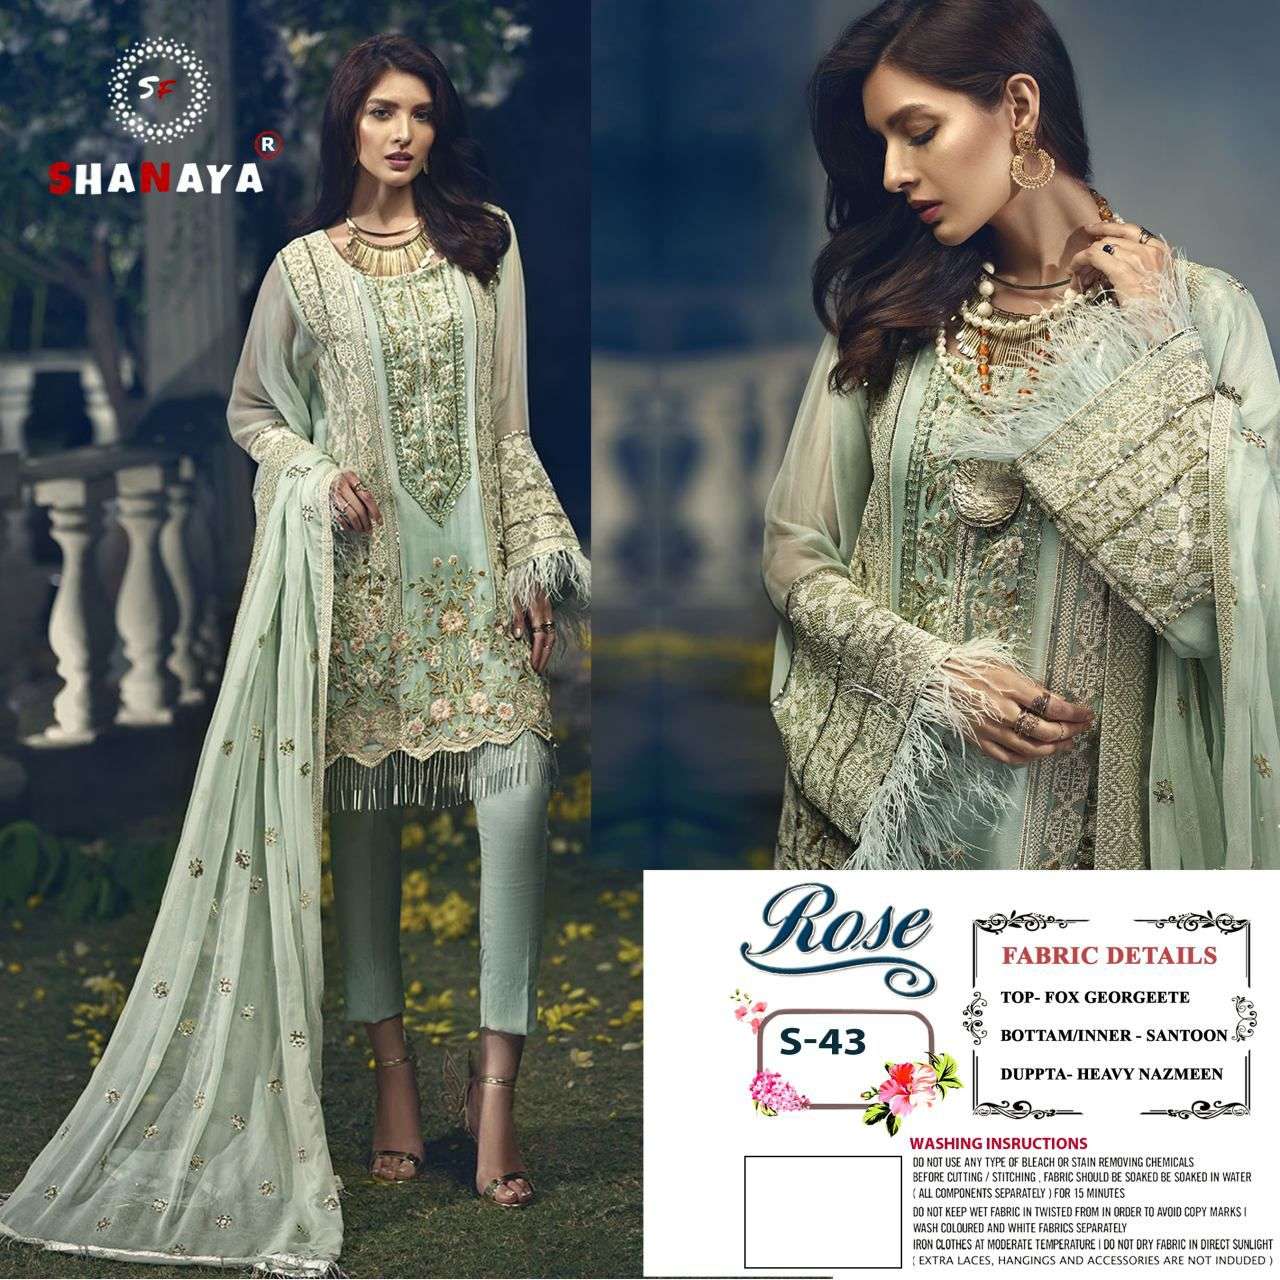 ROSE S-43 EDITION BY SHANAYA FASHION S-43 TO S-43-O SERIES DESIGNER GEORGETTE DRESSES